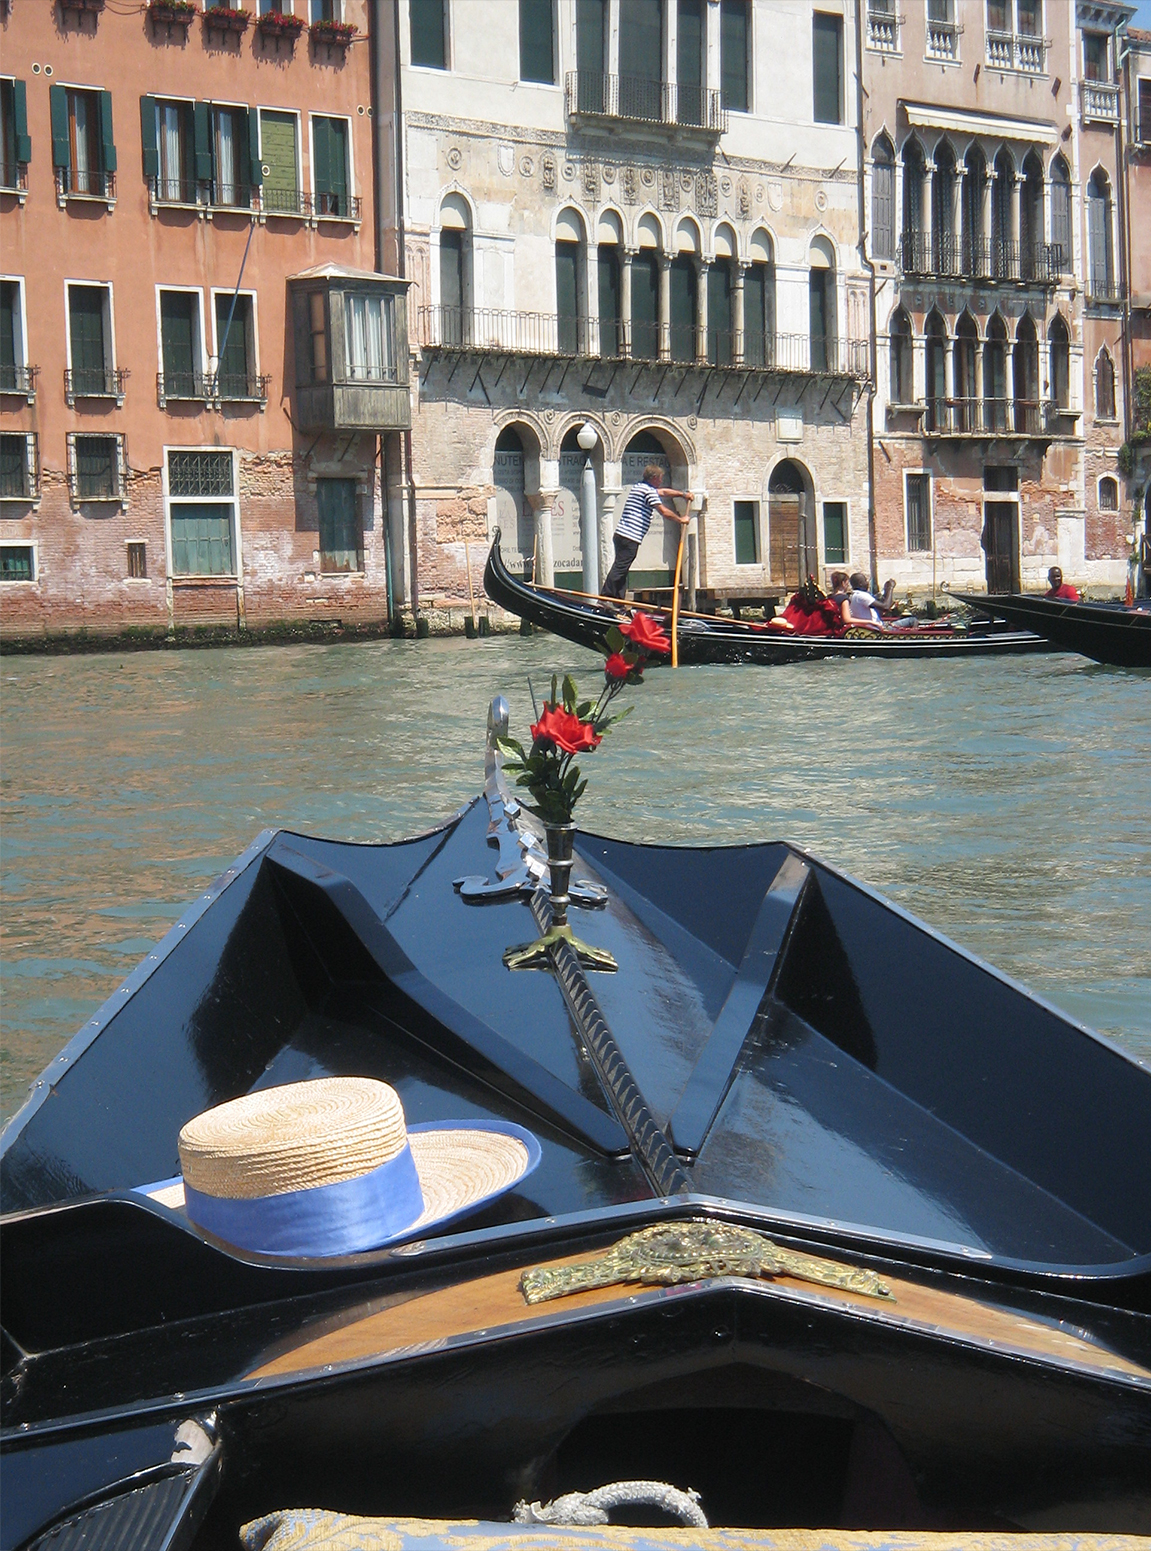 Teri Aitchison sharing a favorite memory from Venice!